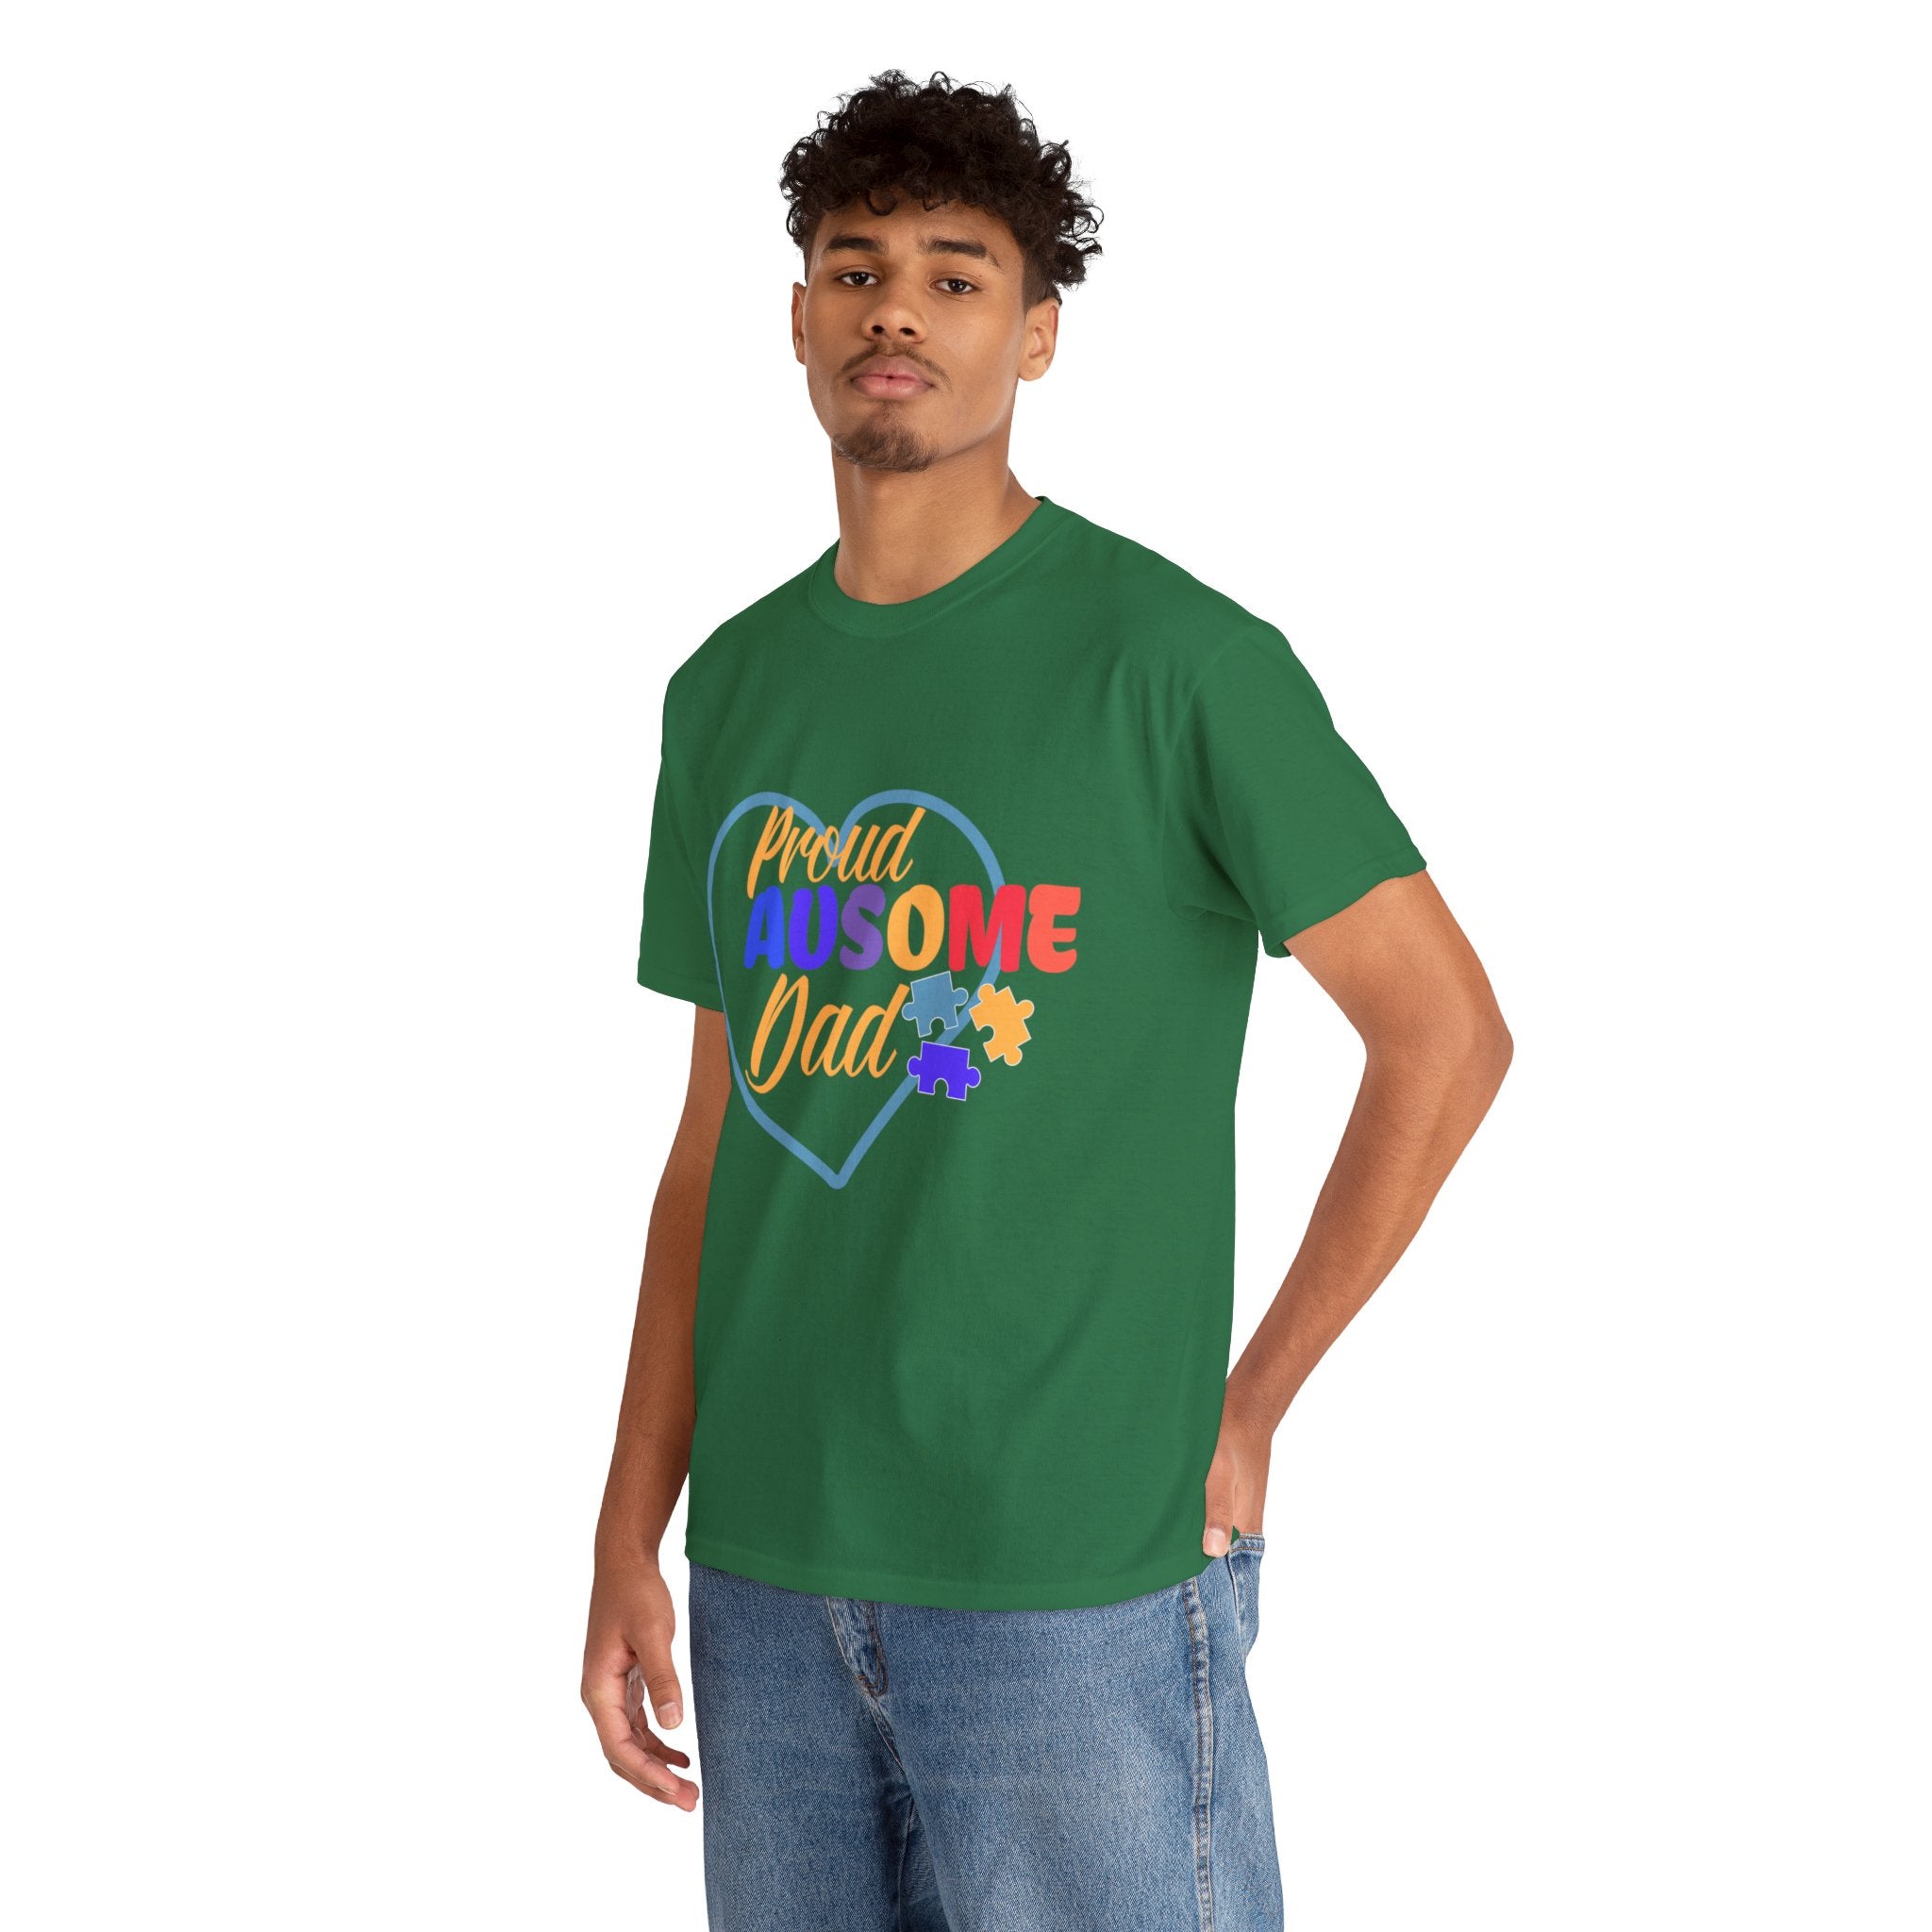 Ausome Dad: Champion of Neurodiversity & Autism Awareness - A Unisex Heavy Cotton Tee Celebrating Supportive Fathers and Advocacy in Style - A Heartfelt Tribute to Exceptional Parenting